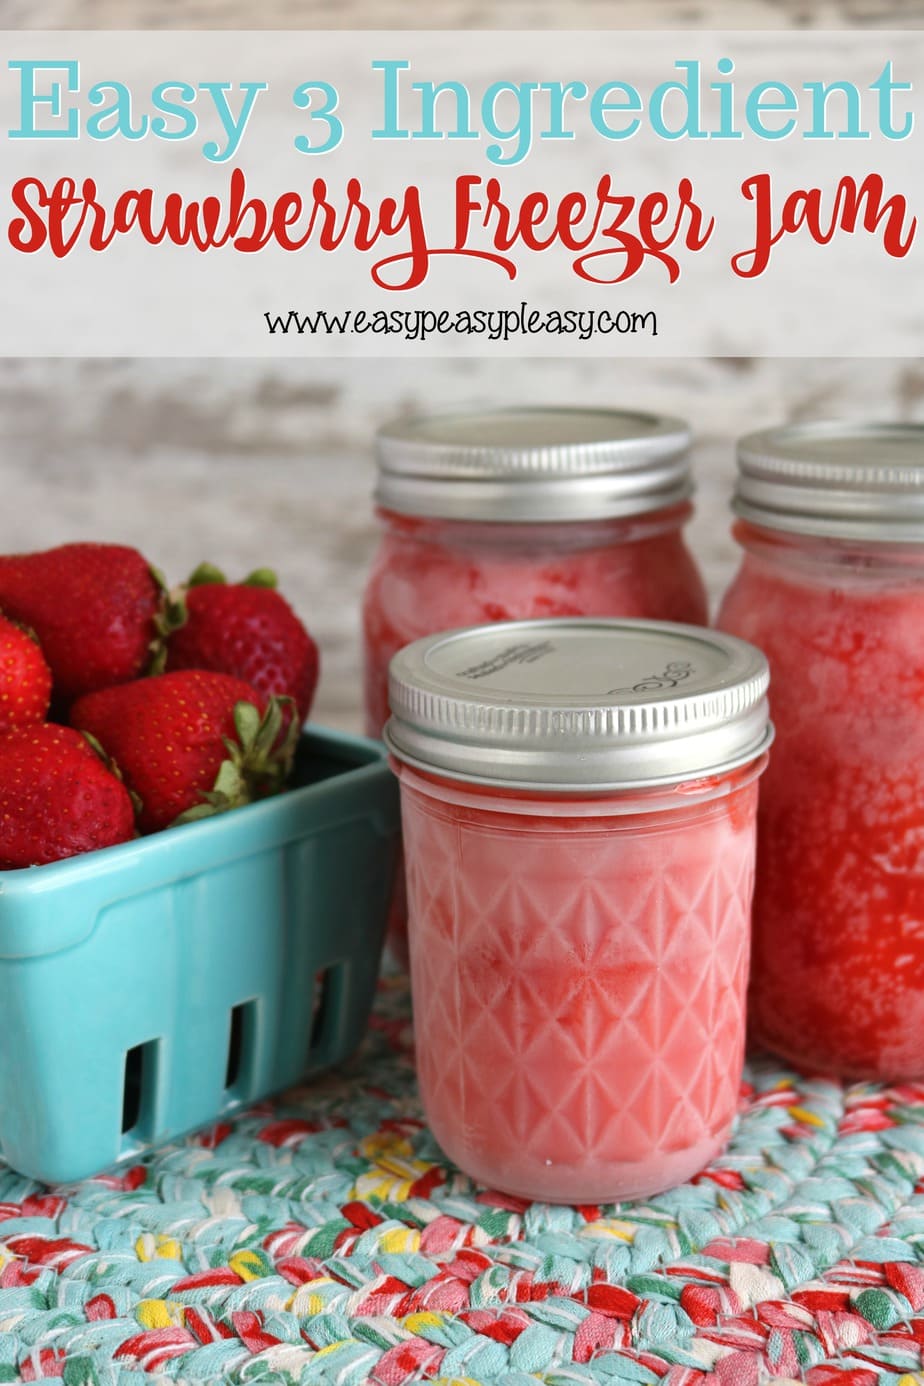 Grab some strawberries and make your very own Strawberry Freezer Jam.